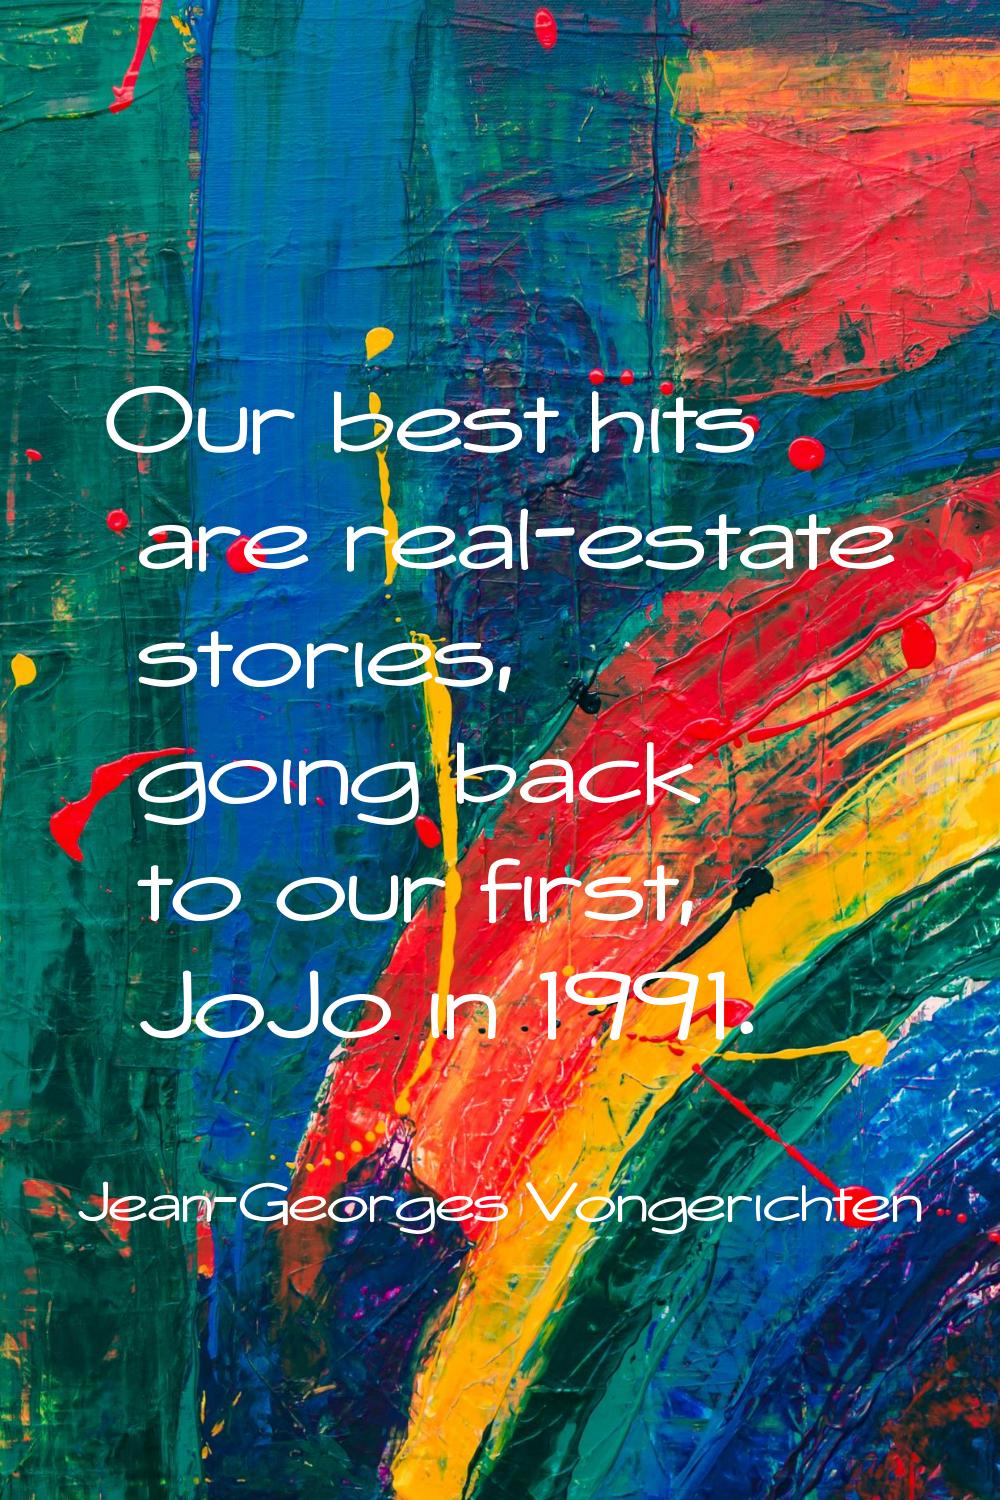 Our best hits are real-estate stories, going back to our first, JoJo in 1991.